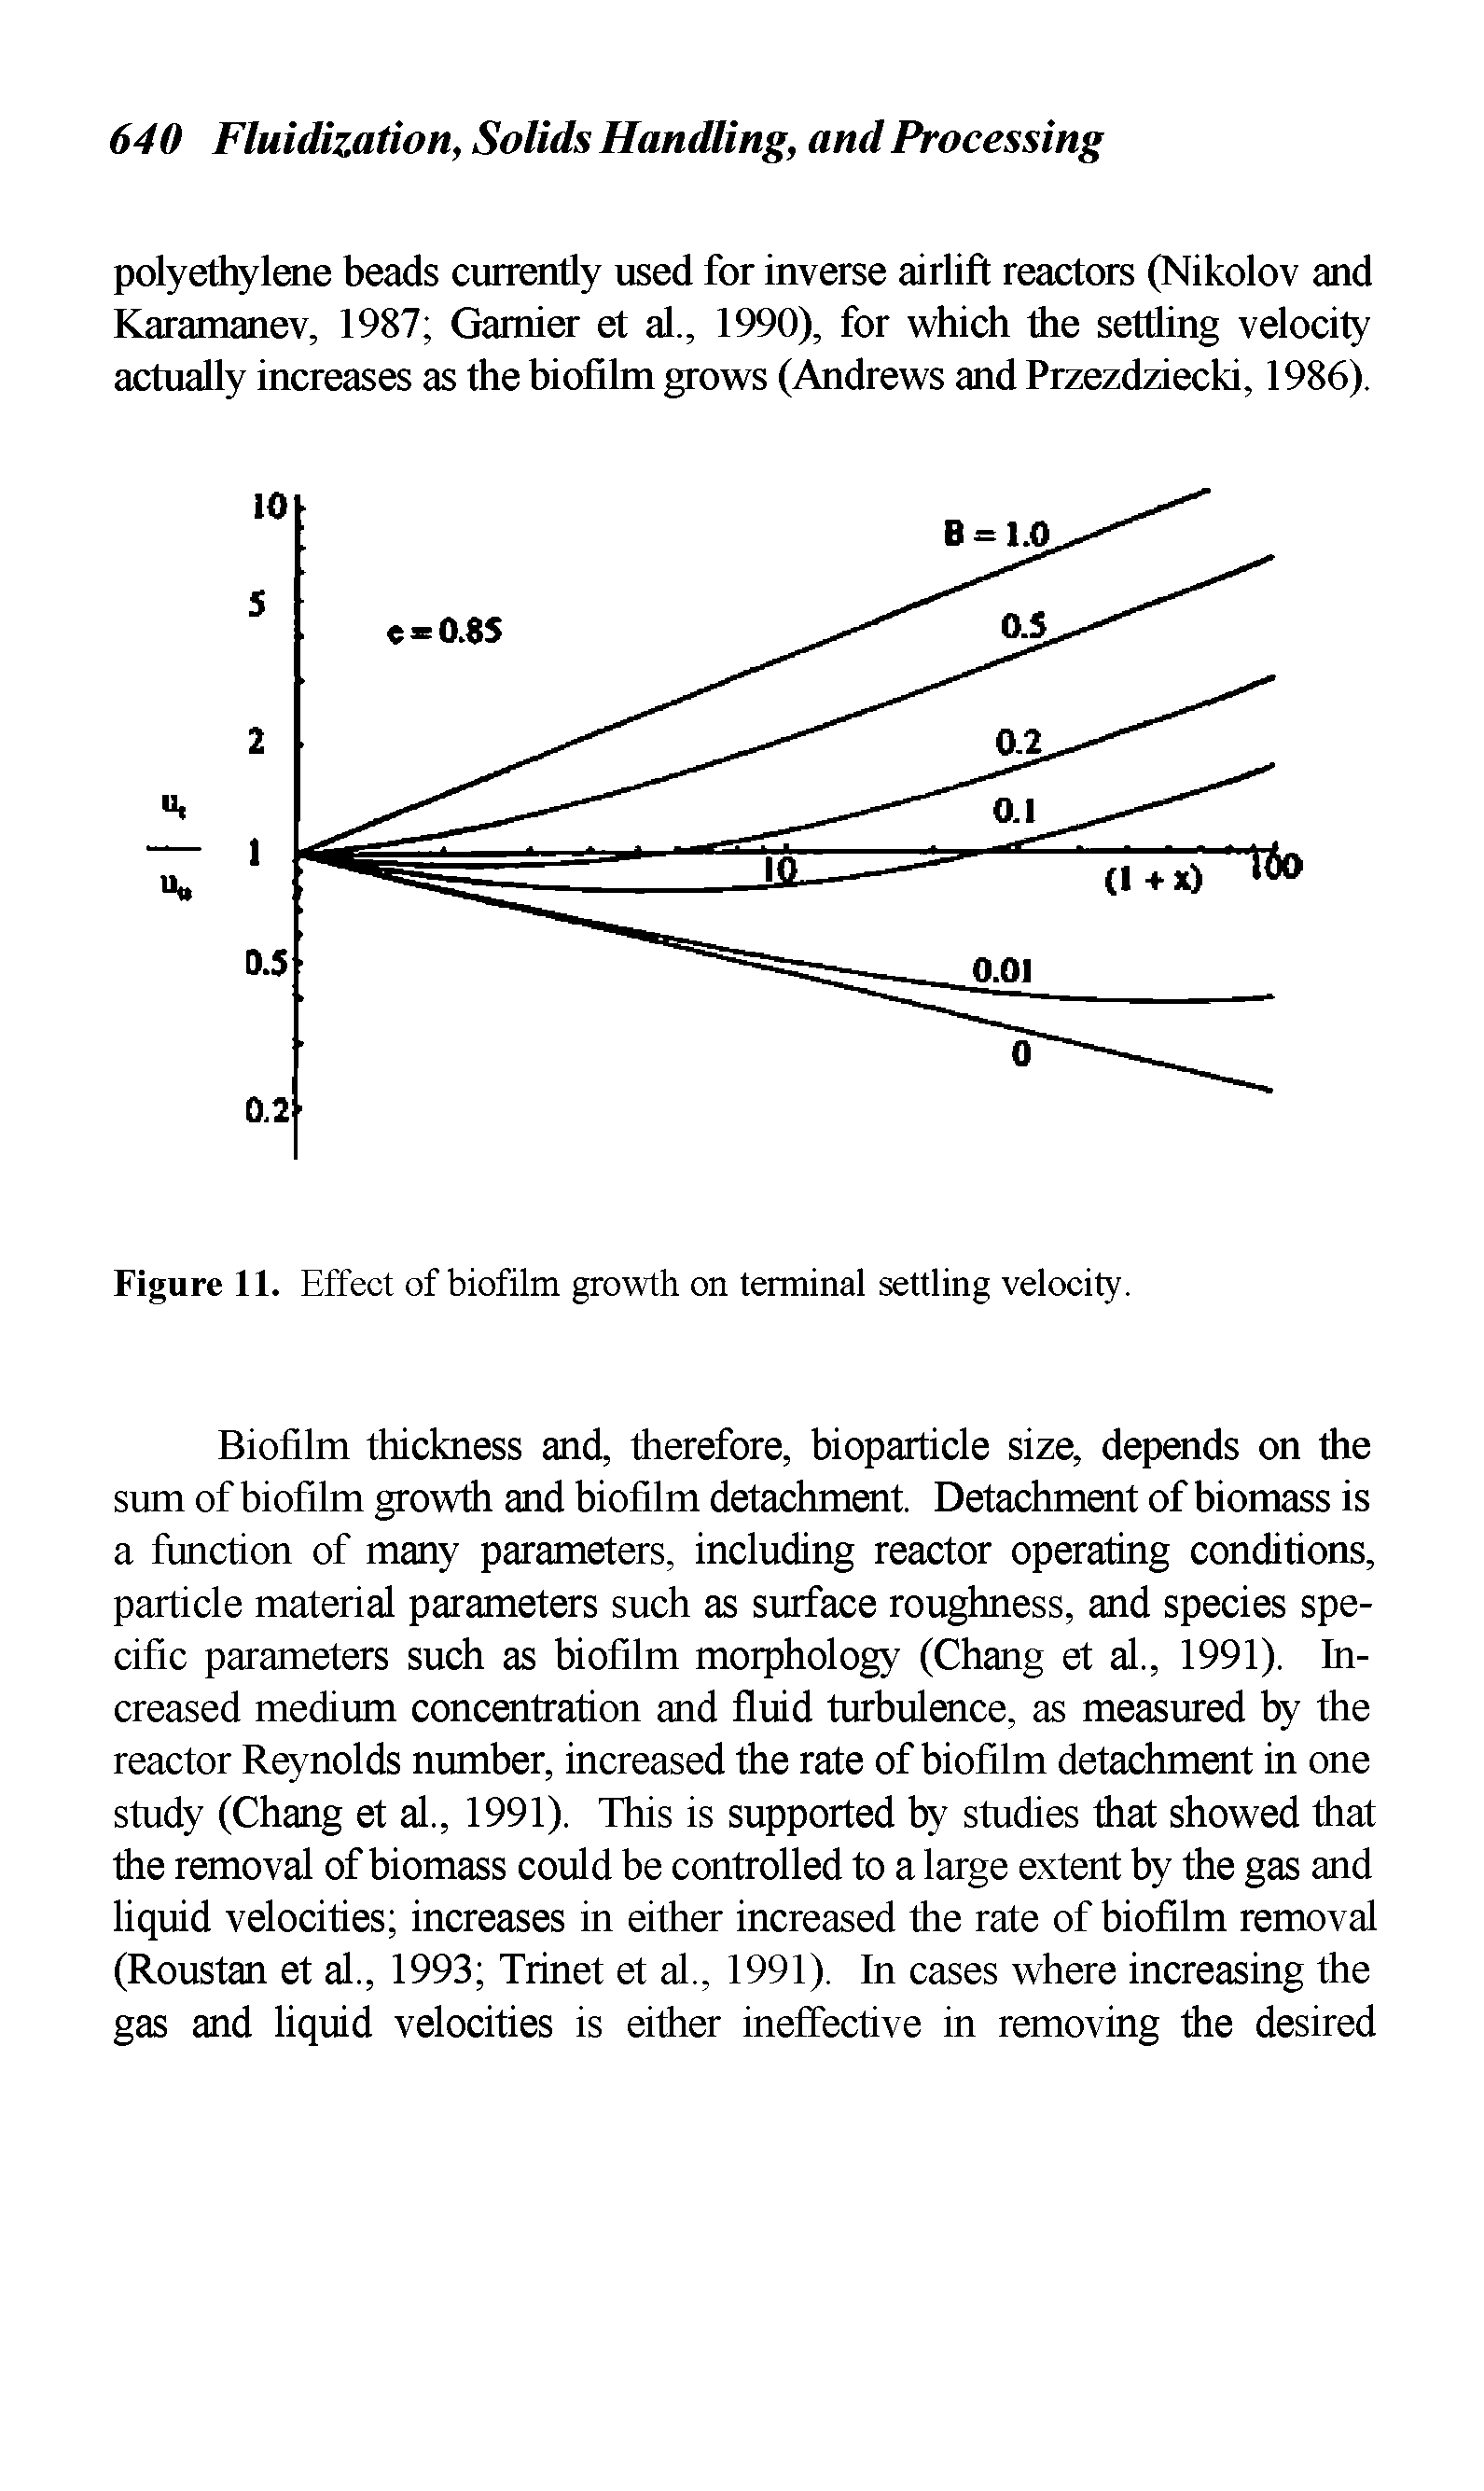 Figure 11. Effect of biofilm growth on terminal settling velocity.